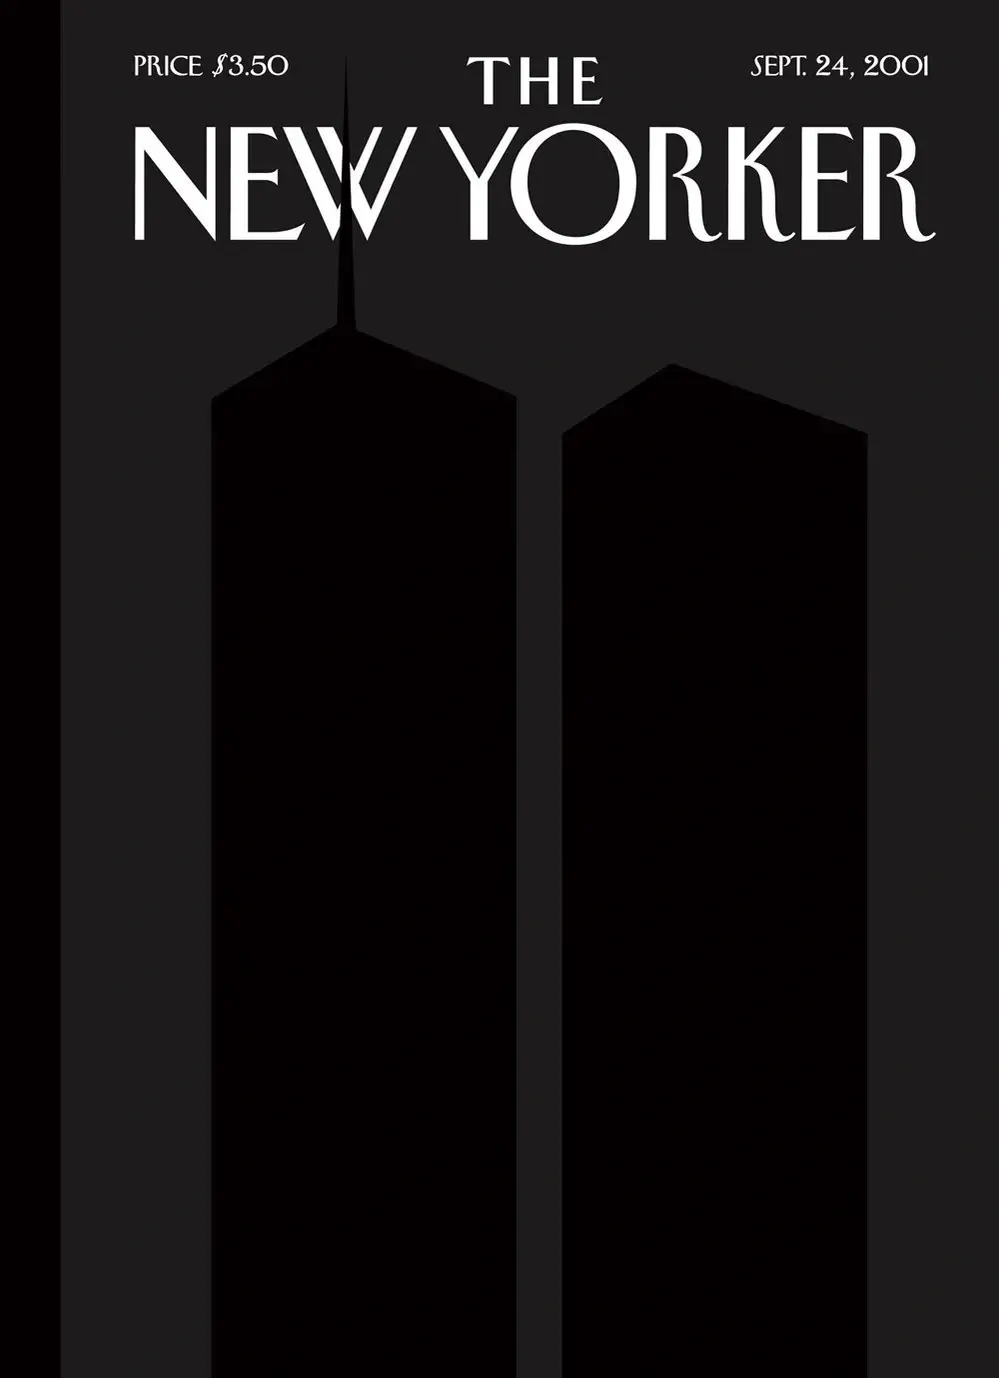 9/11 New Yorker Magazine cover with a silhouette of the twin towers.